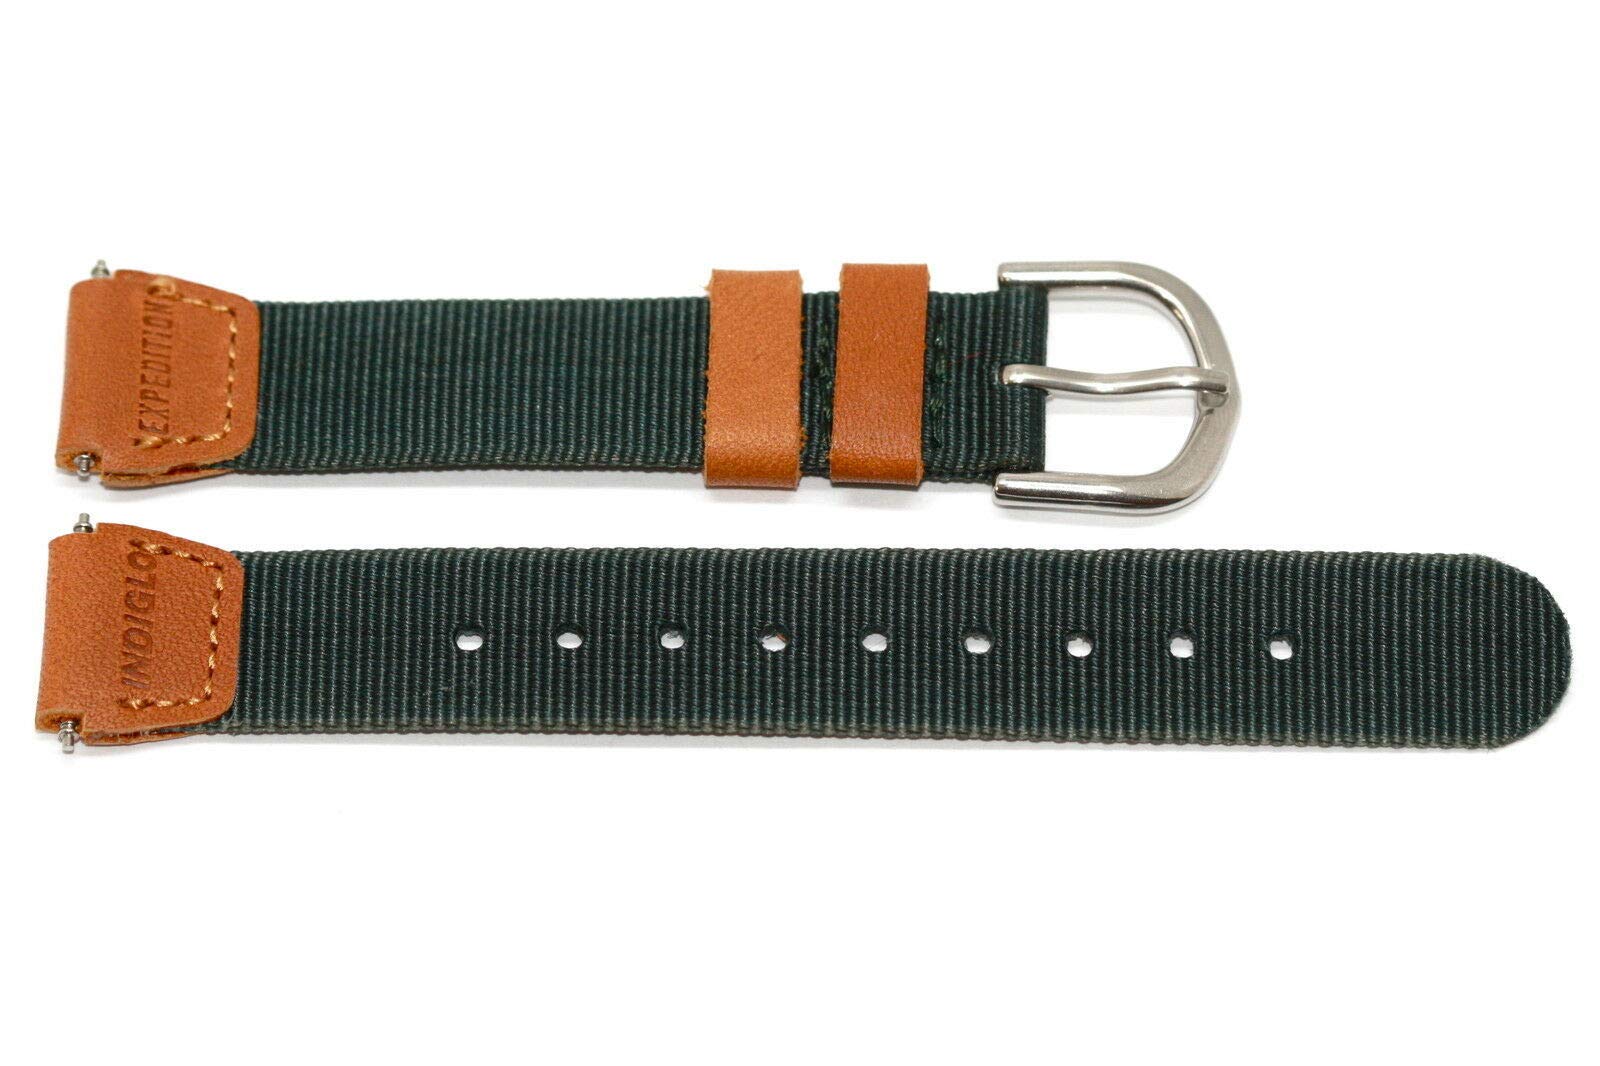 18mm Timex Expedition Super Thin Nylon Watch Band